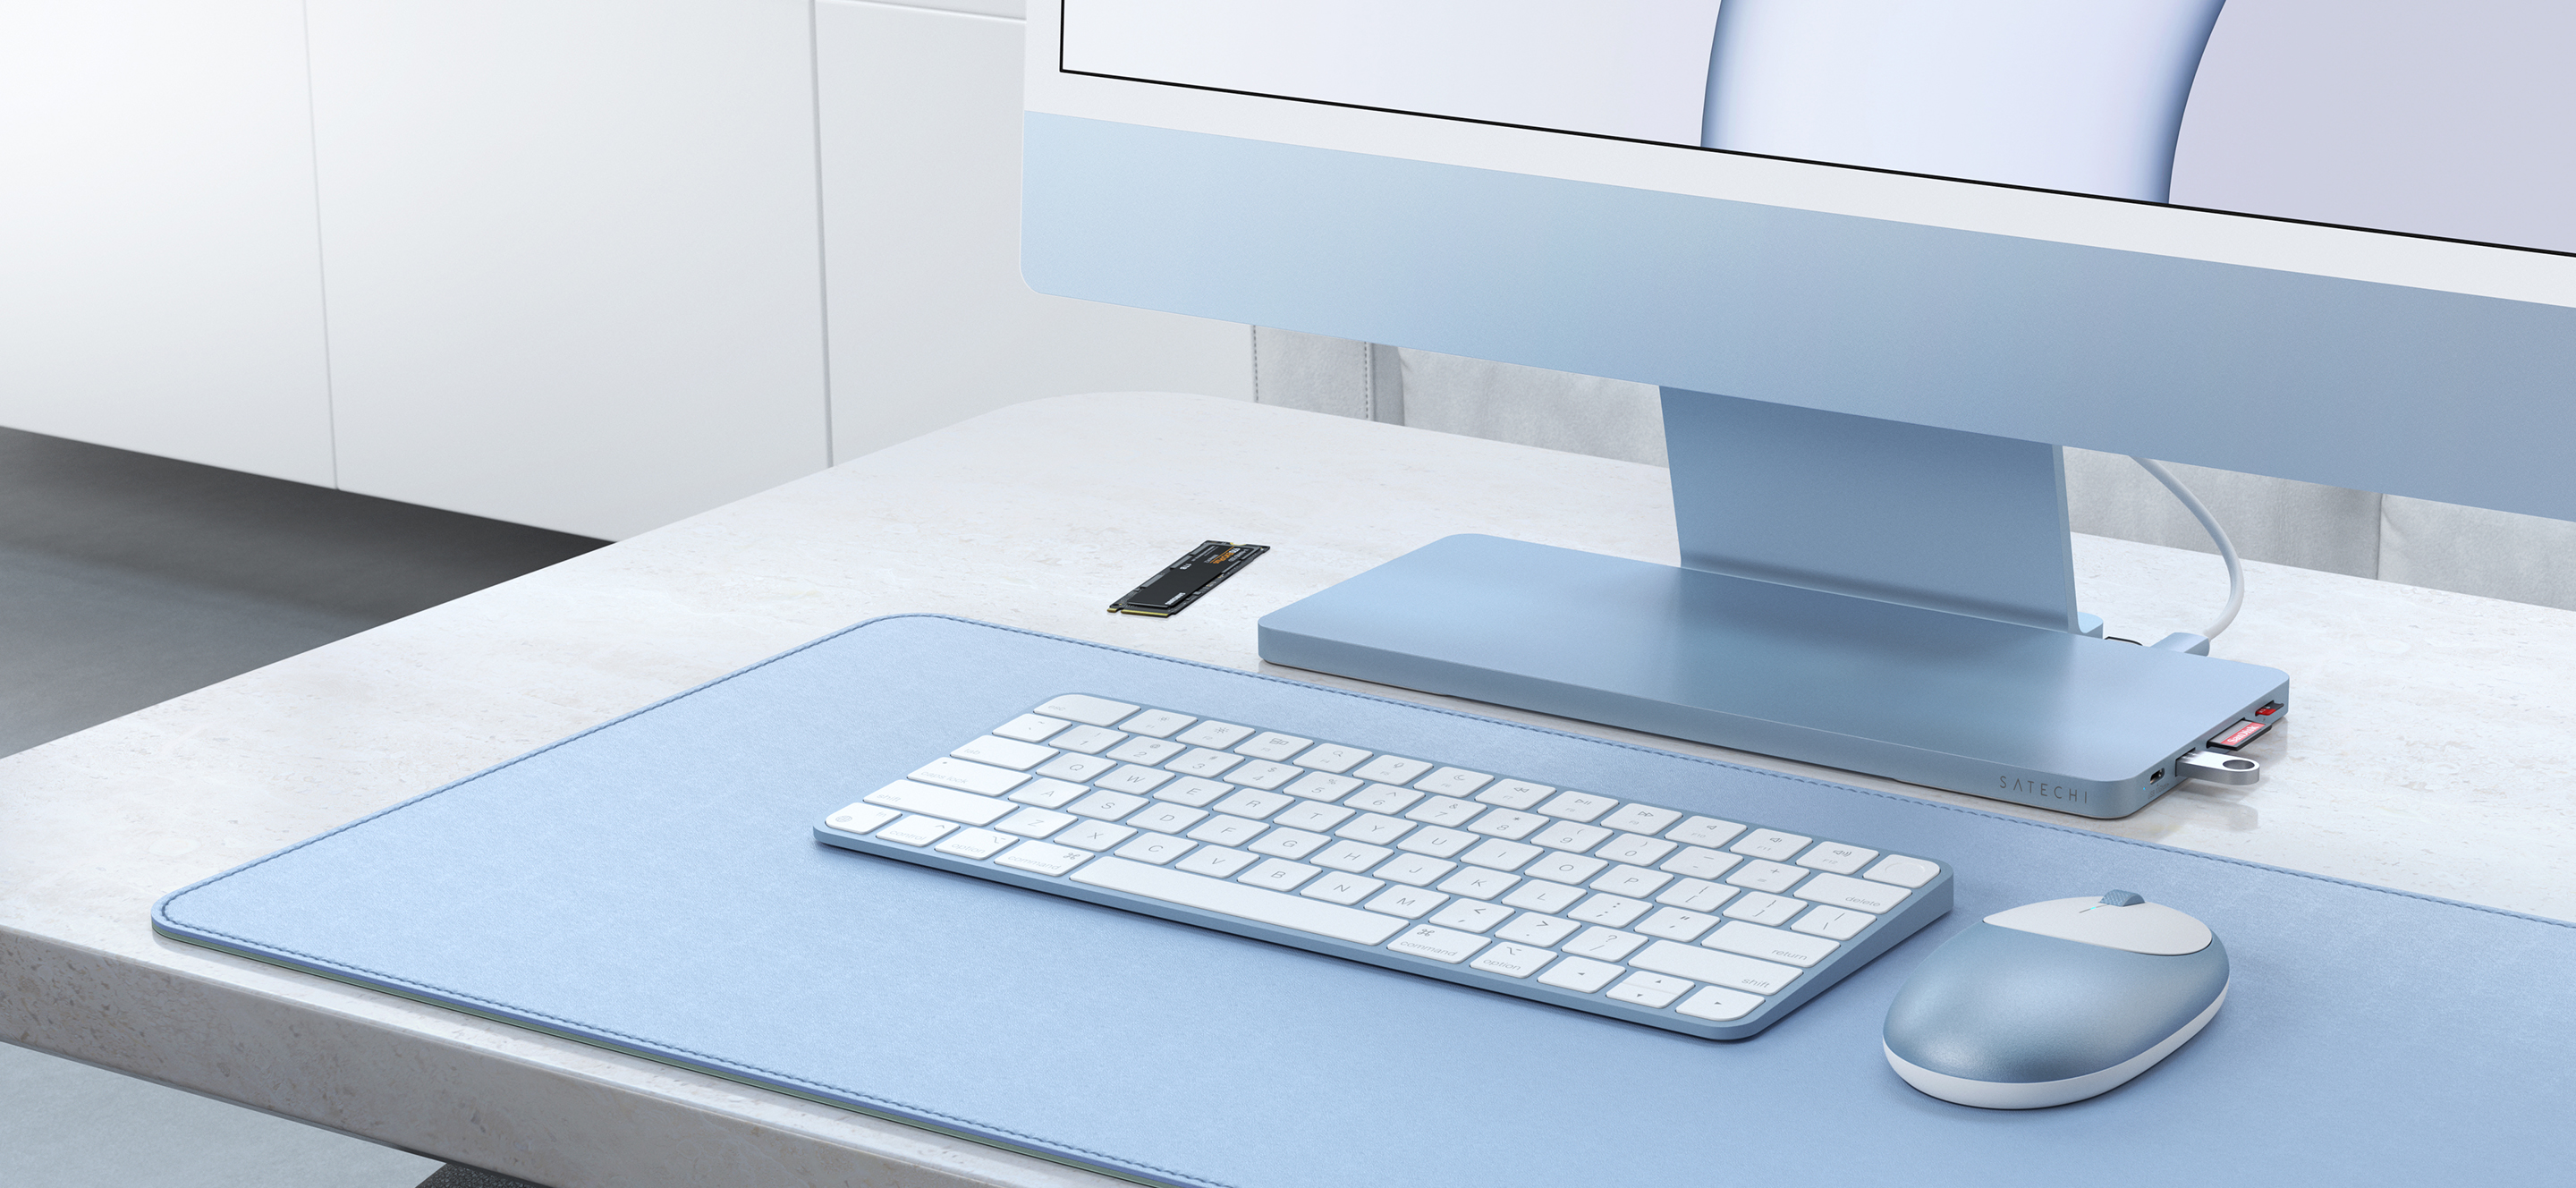 Satechi Introduces New USB-C Slim Dock for 24-Inch iMac With Enclosure for External SSD